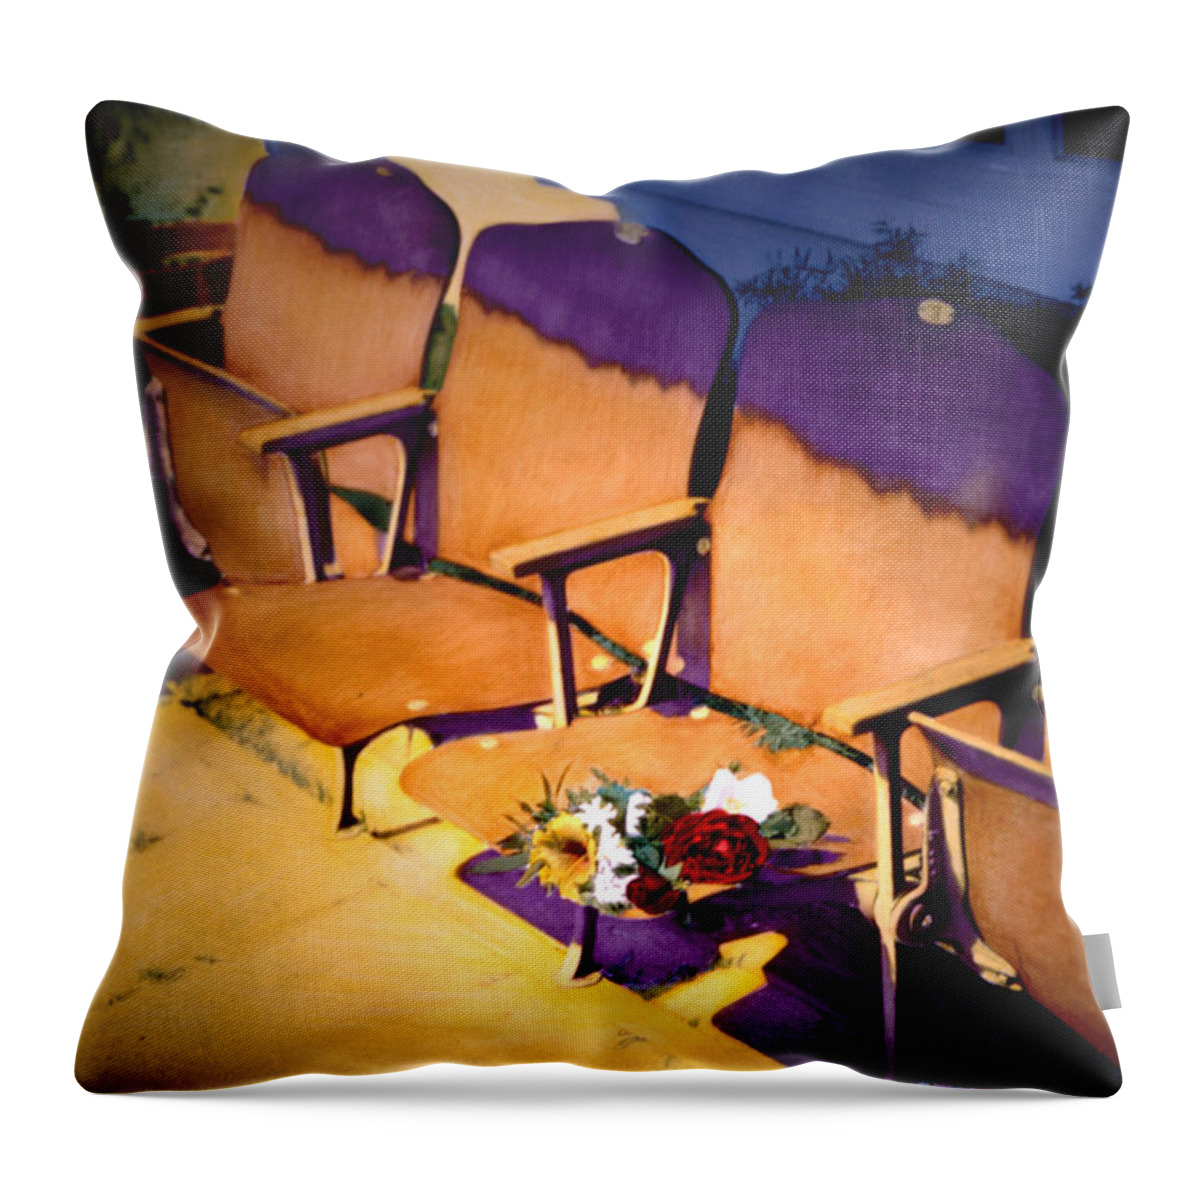 Hand Painted Throw Pillow featuring the photograph The Courting by Joe Hoover